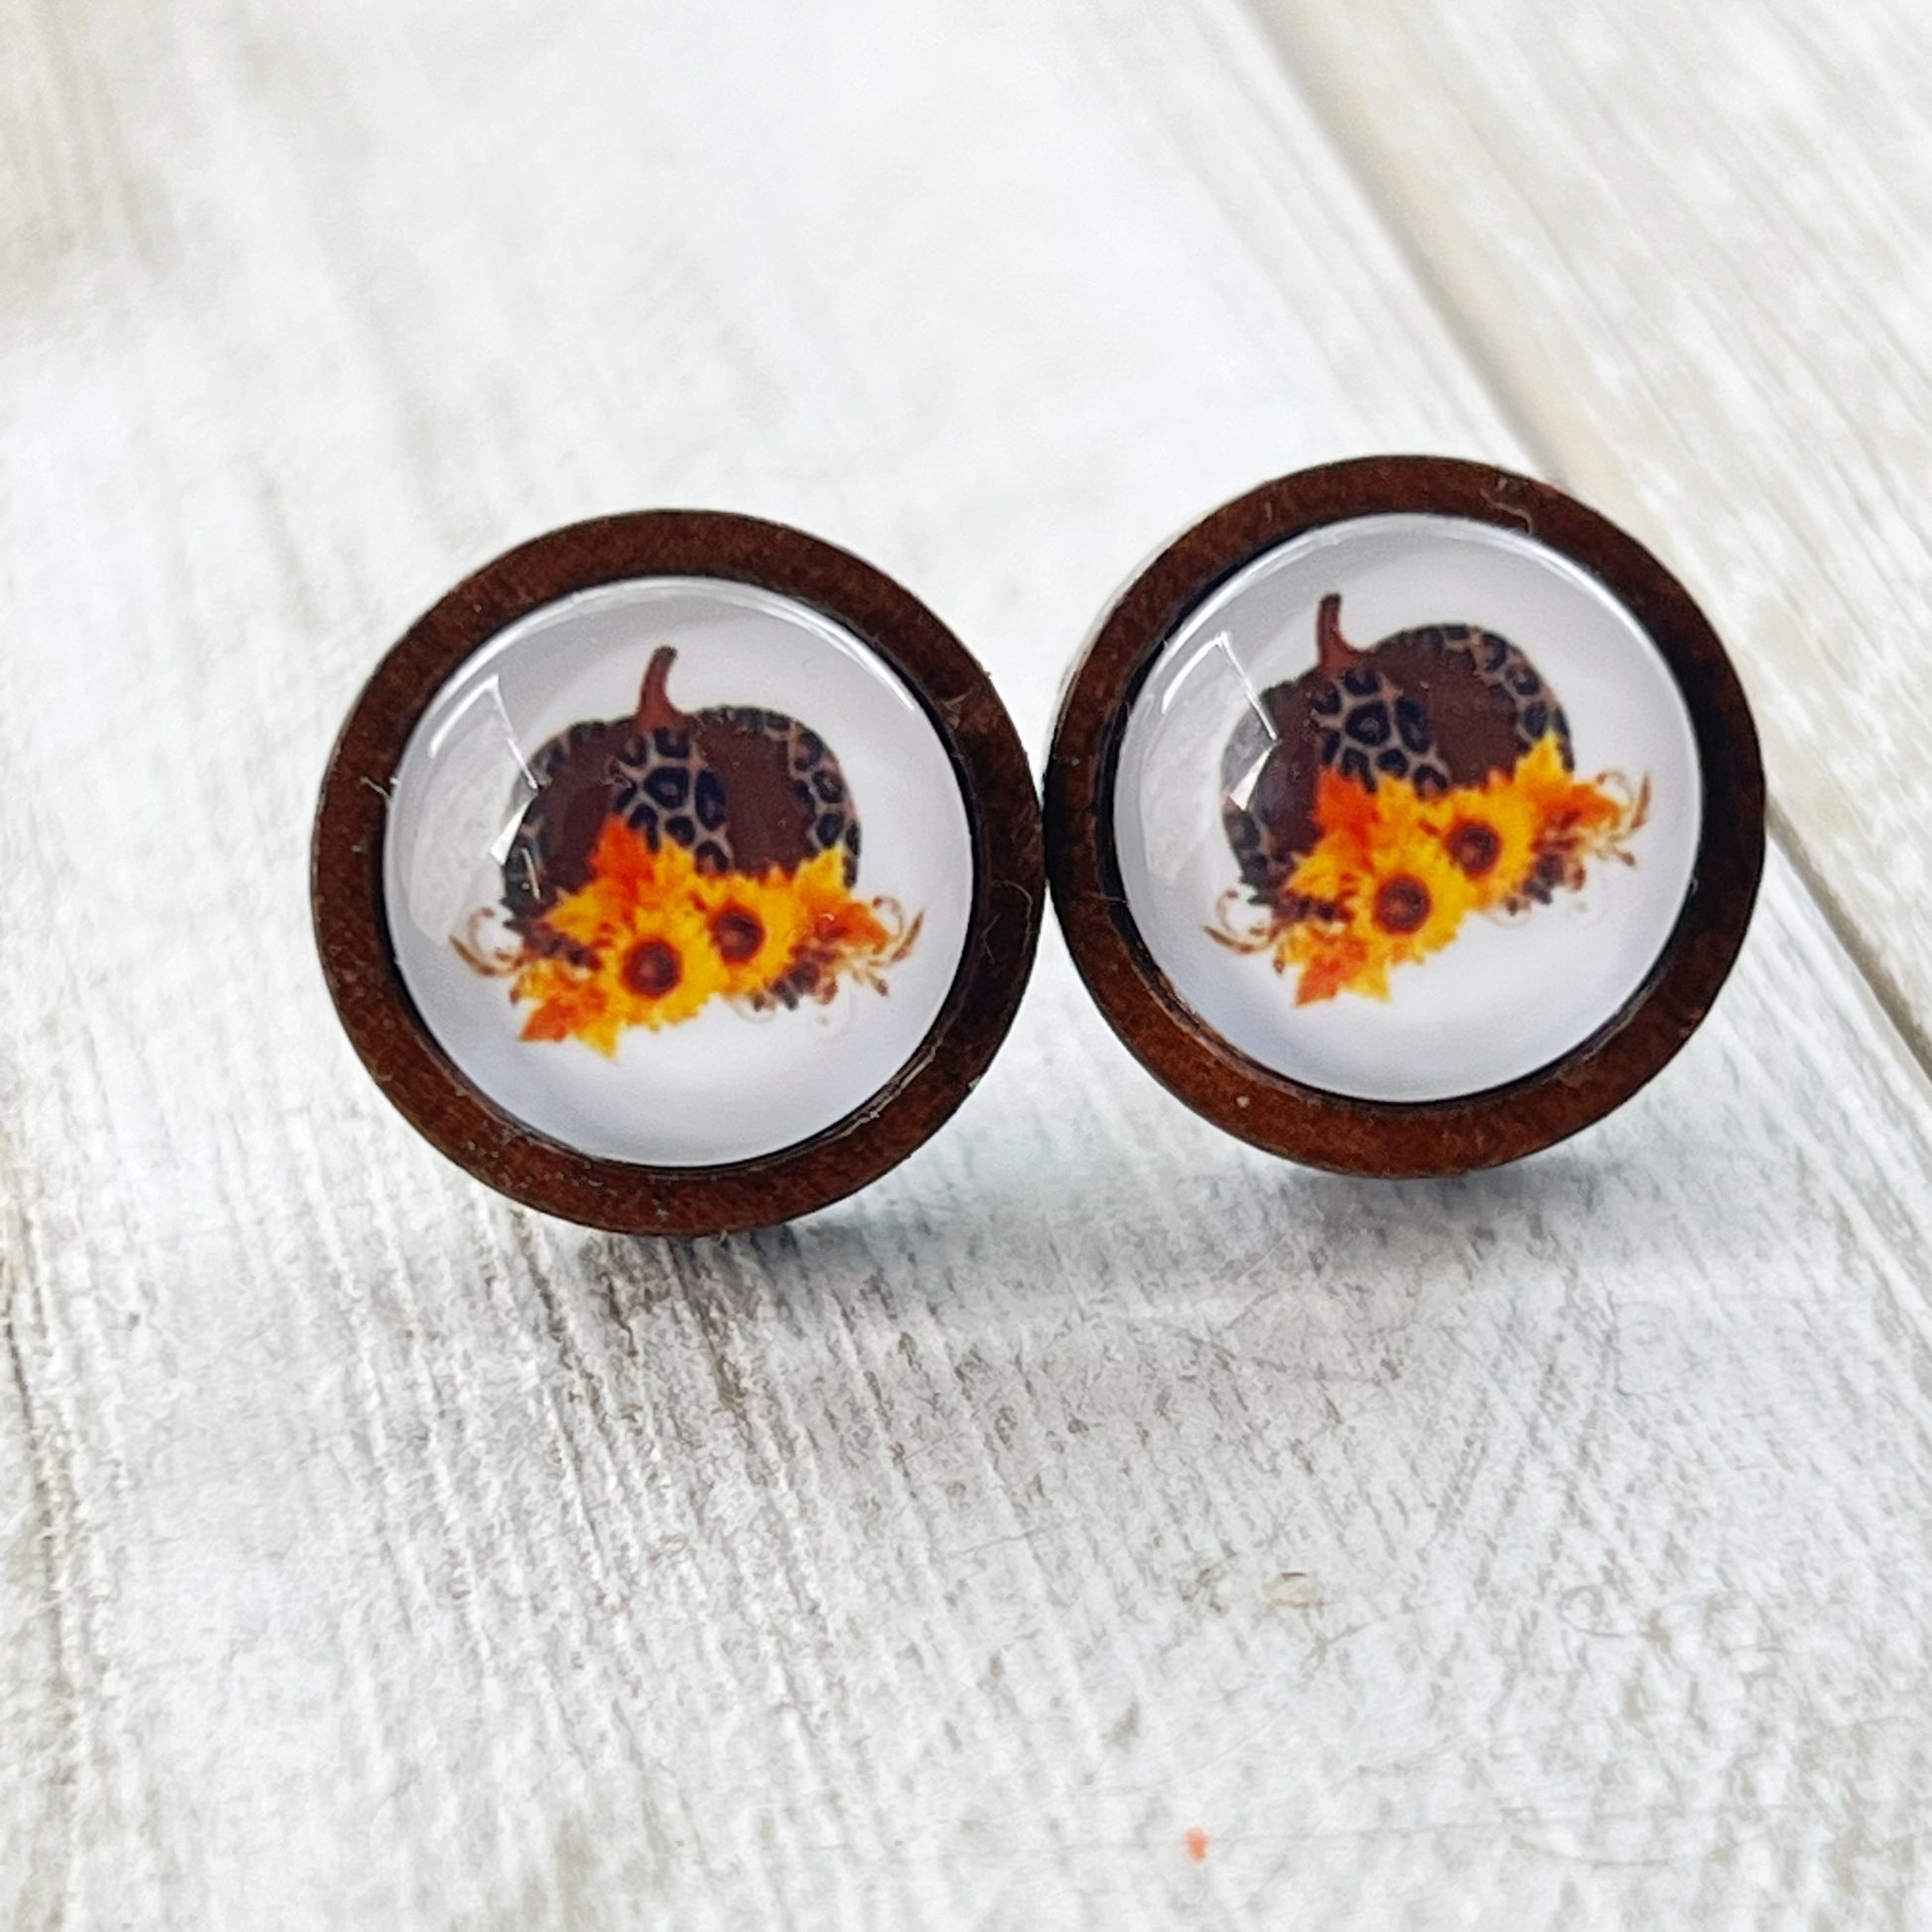 Sunflower & Pumpkin Wood Stud Earrings: Charming Autumnal Accents for Your Style